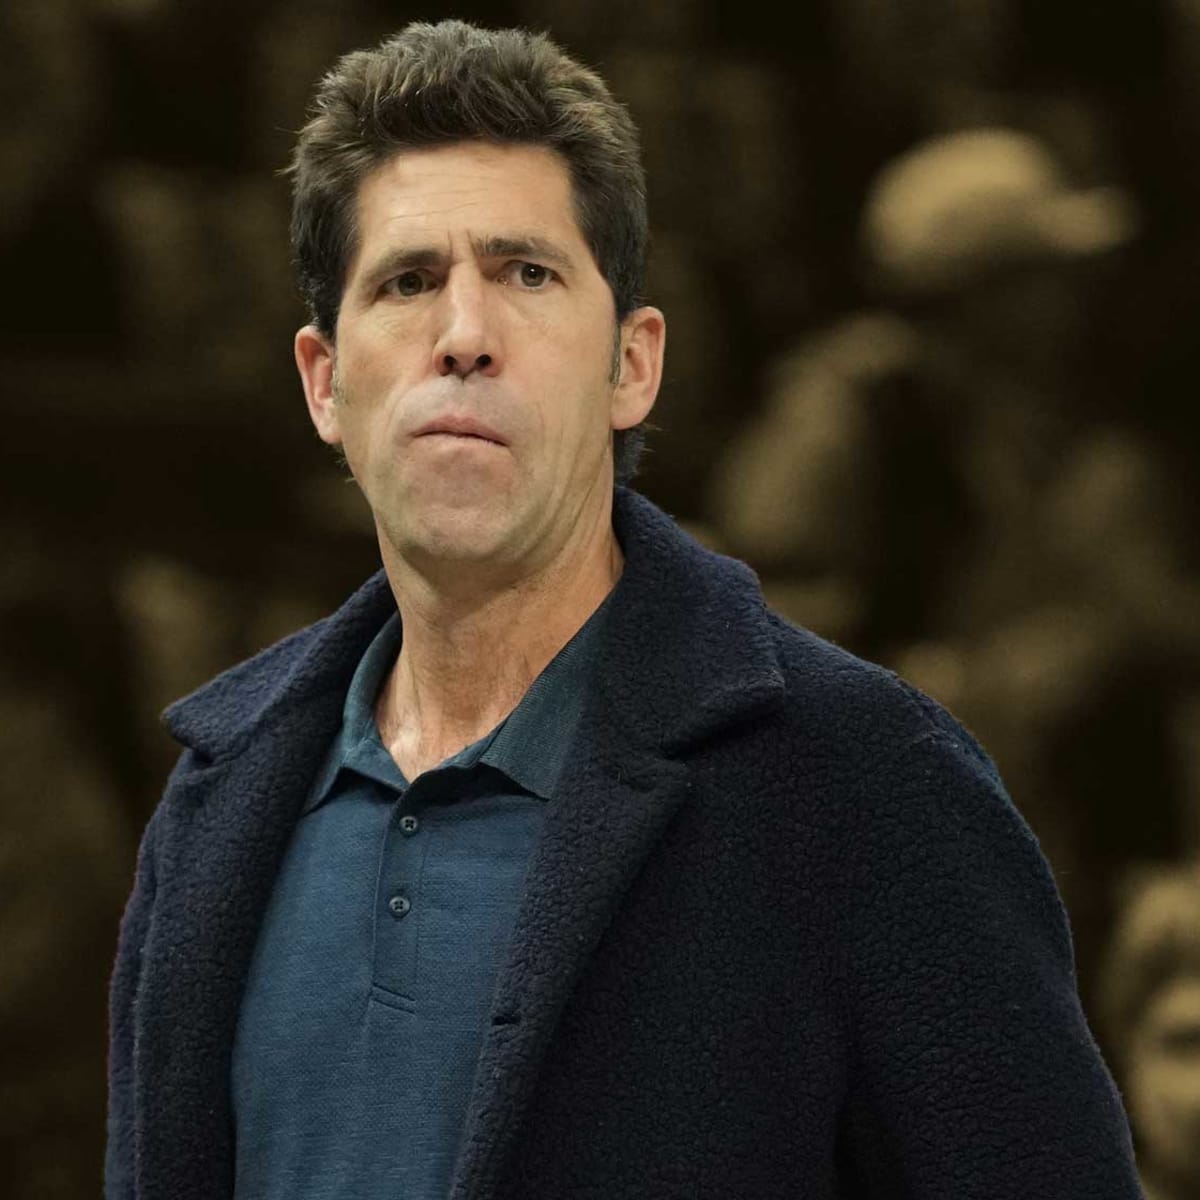 Bob Myers Says 'It Wasn't Joy' When Warriors Won 2018 Title with